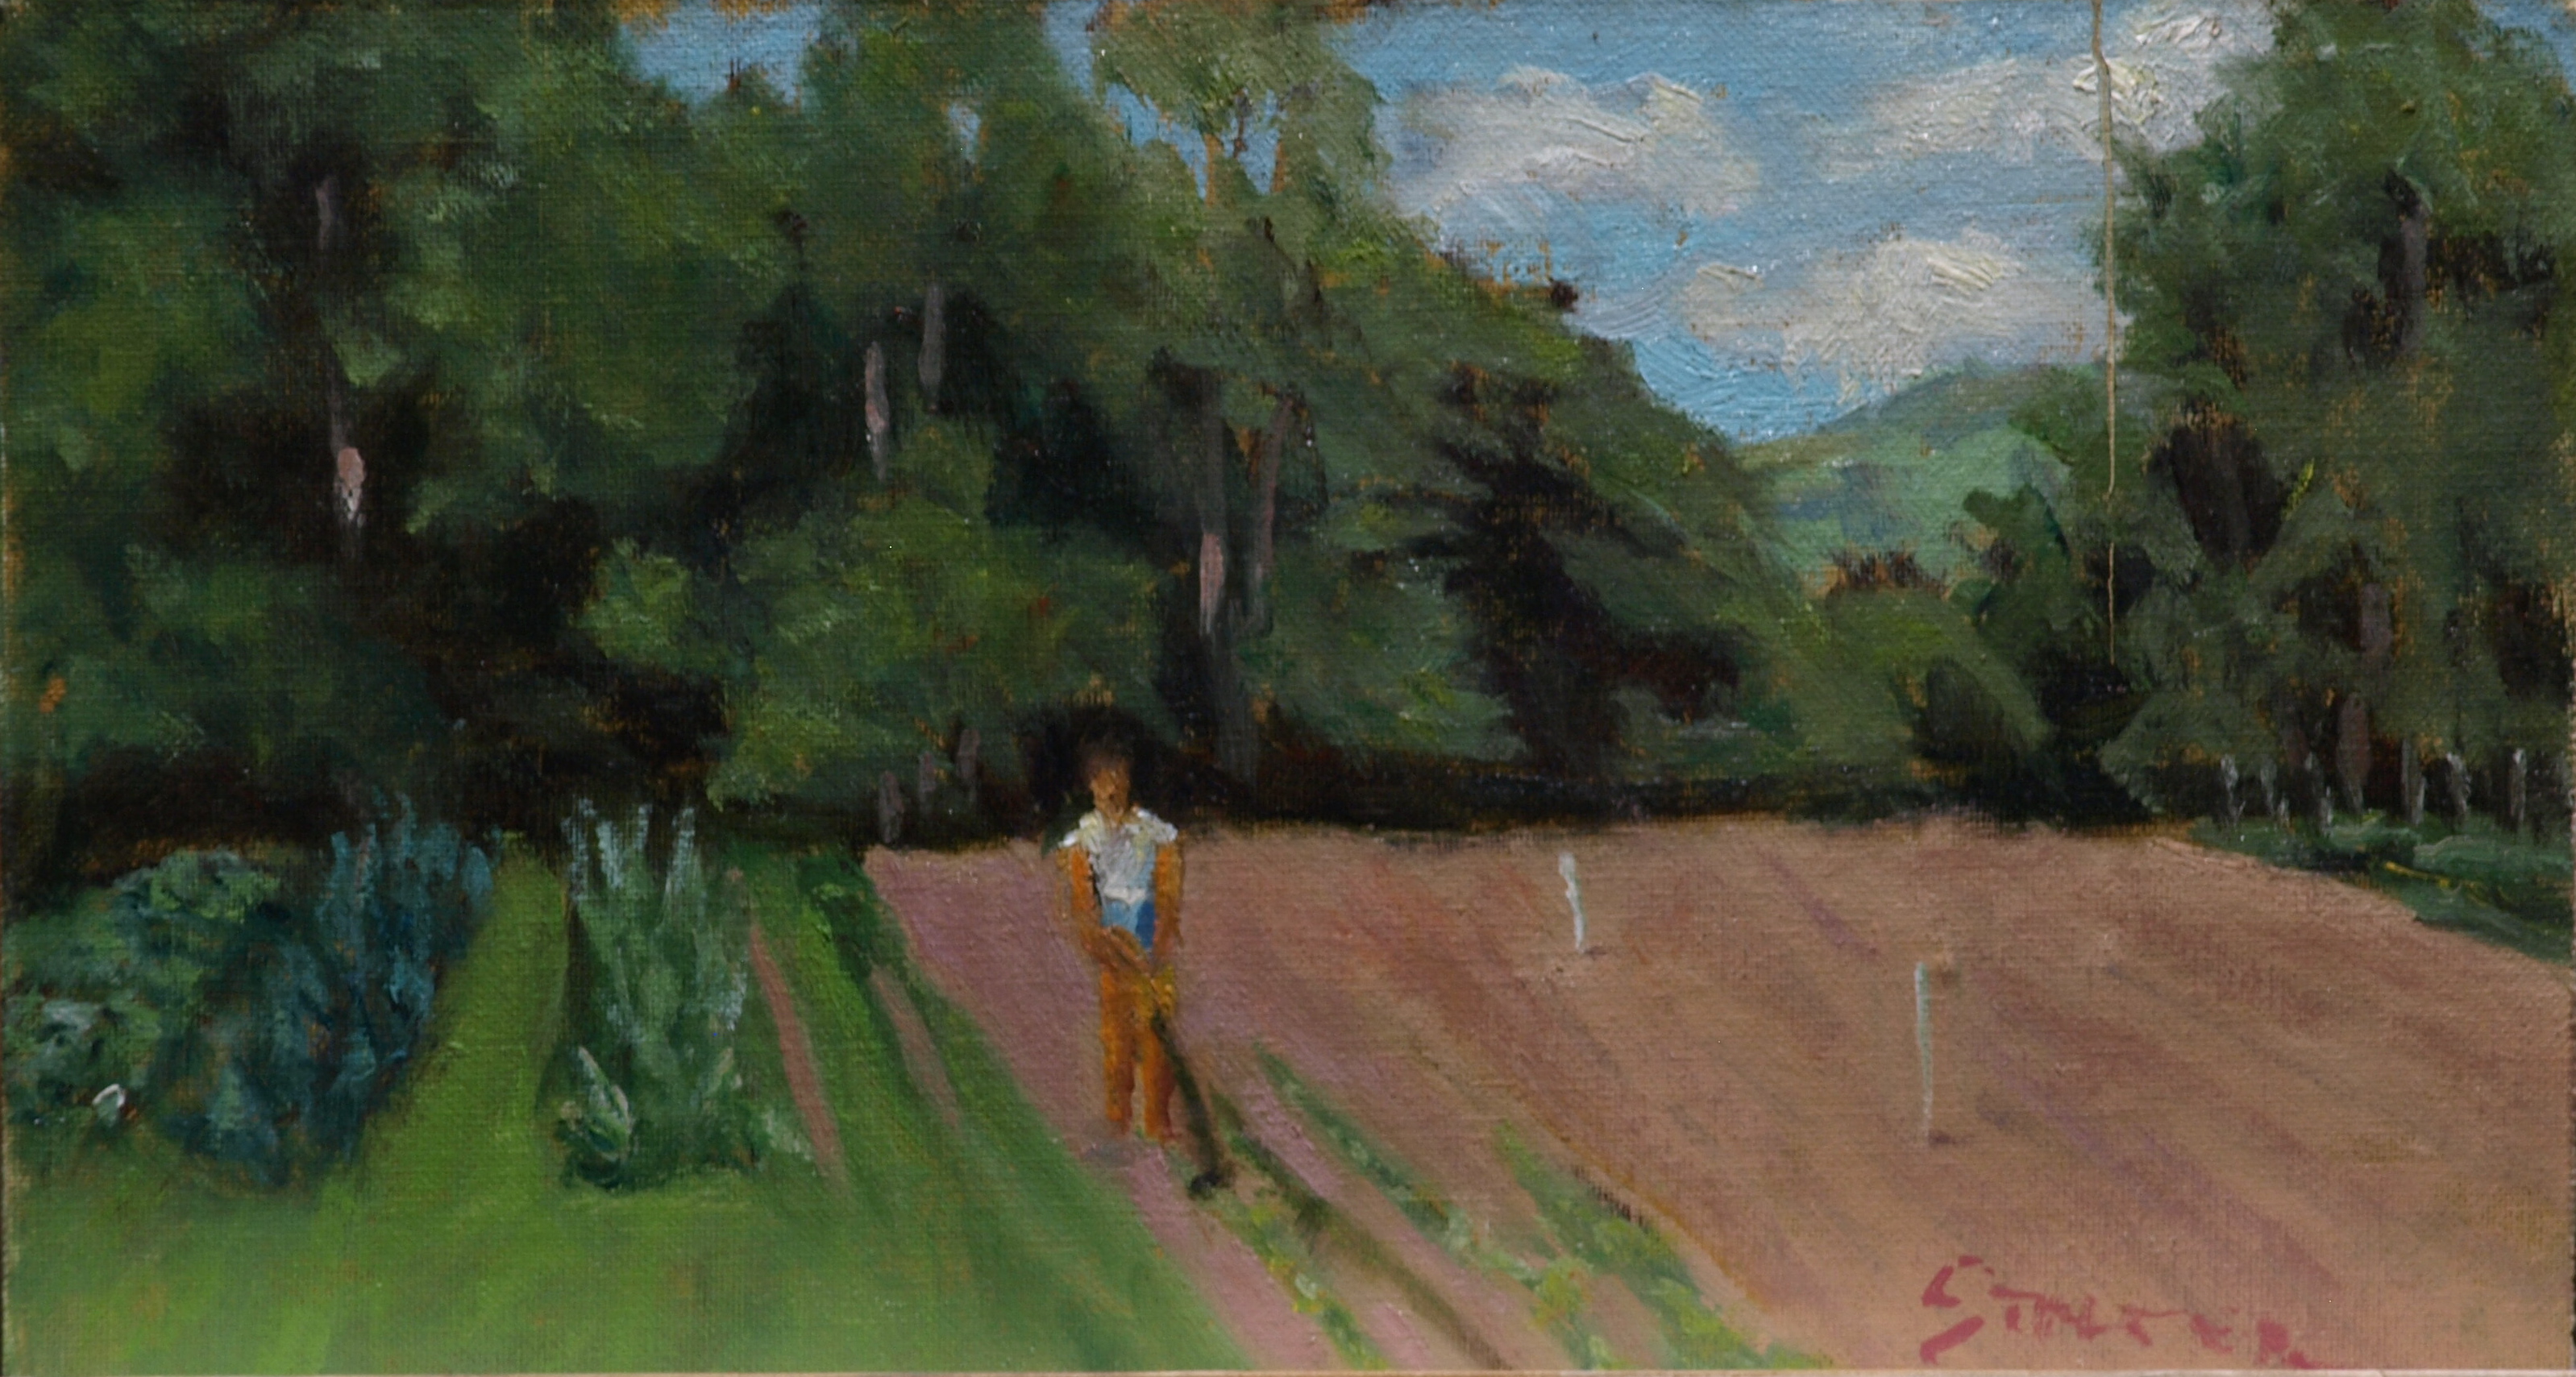 Megan's Farm, Oil on Canvas on Panel, 8 x 14 Inches, by Richard Stalter, $225